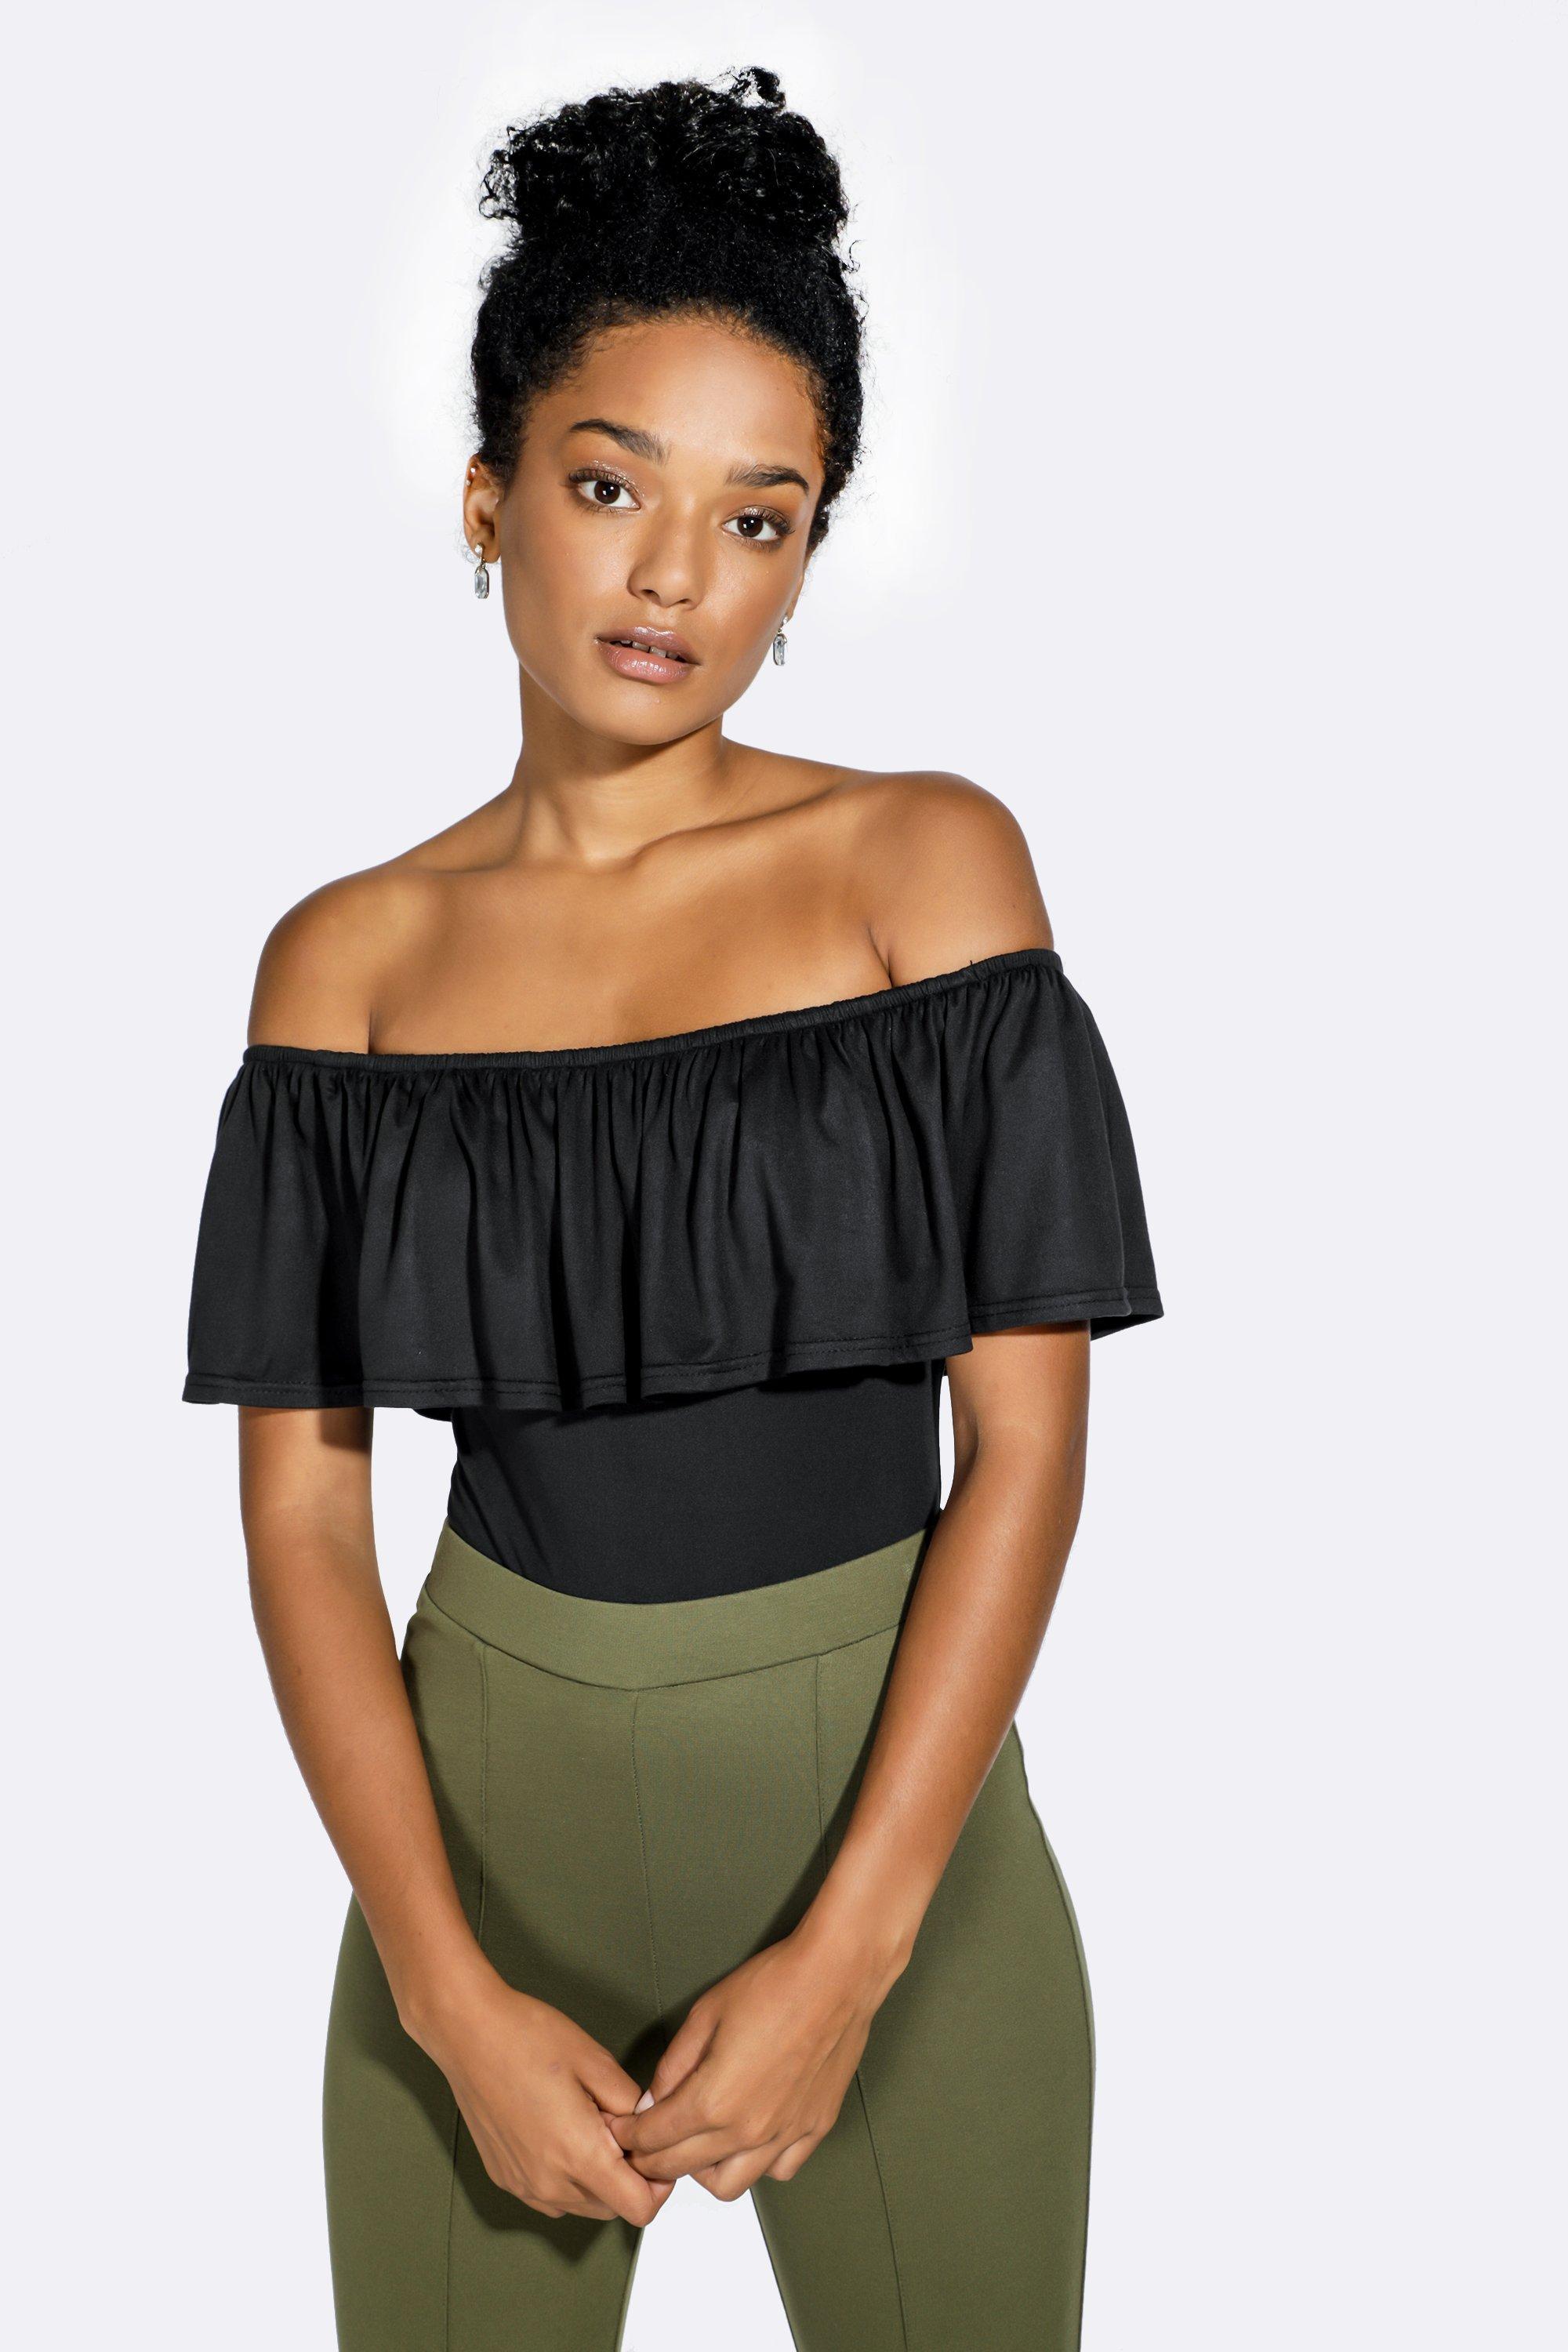 Mr Price - This one shoulder bodysuit is giving us major Friday